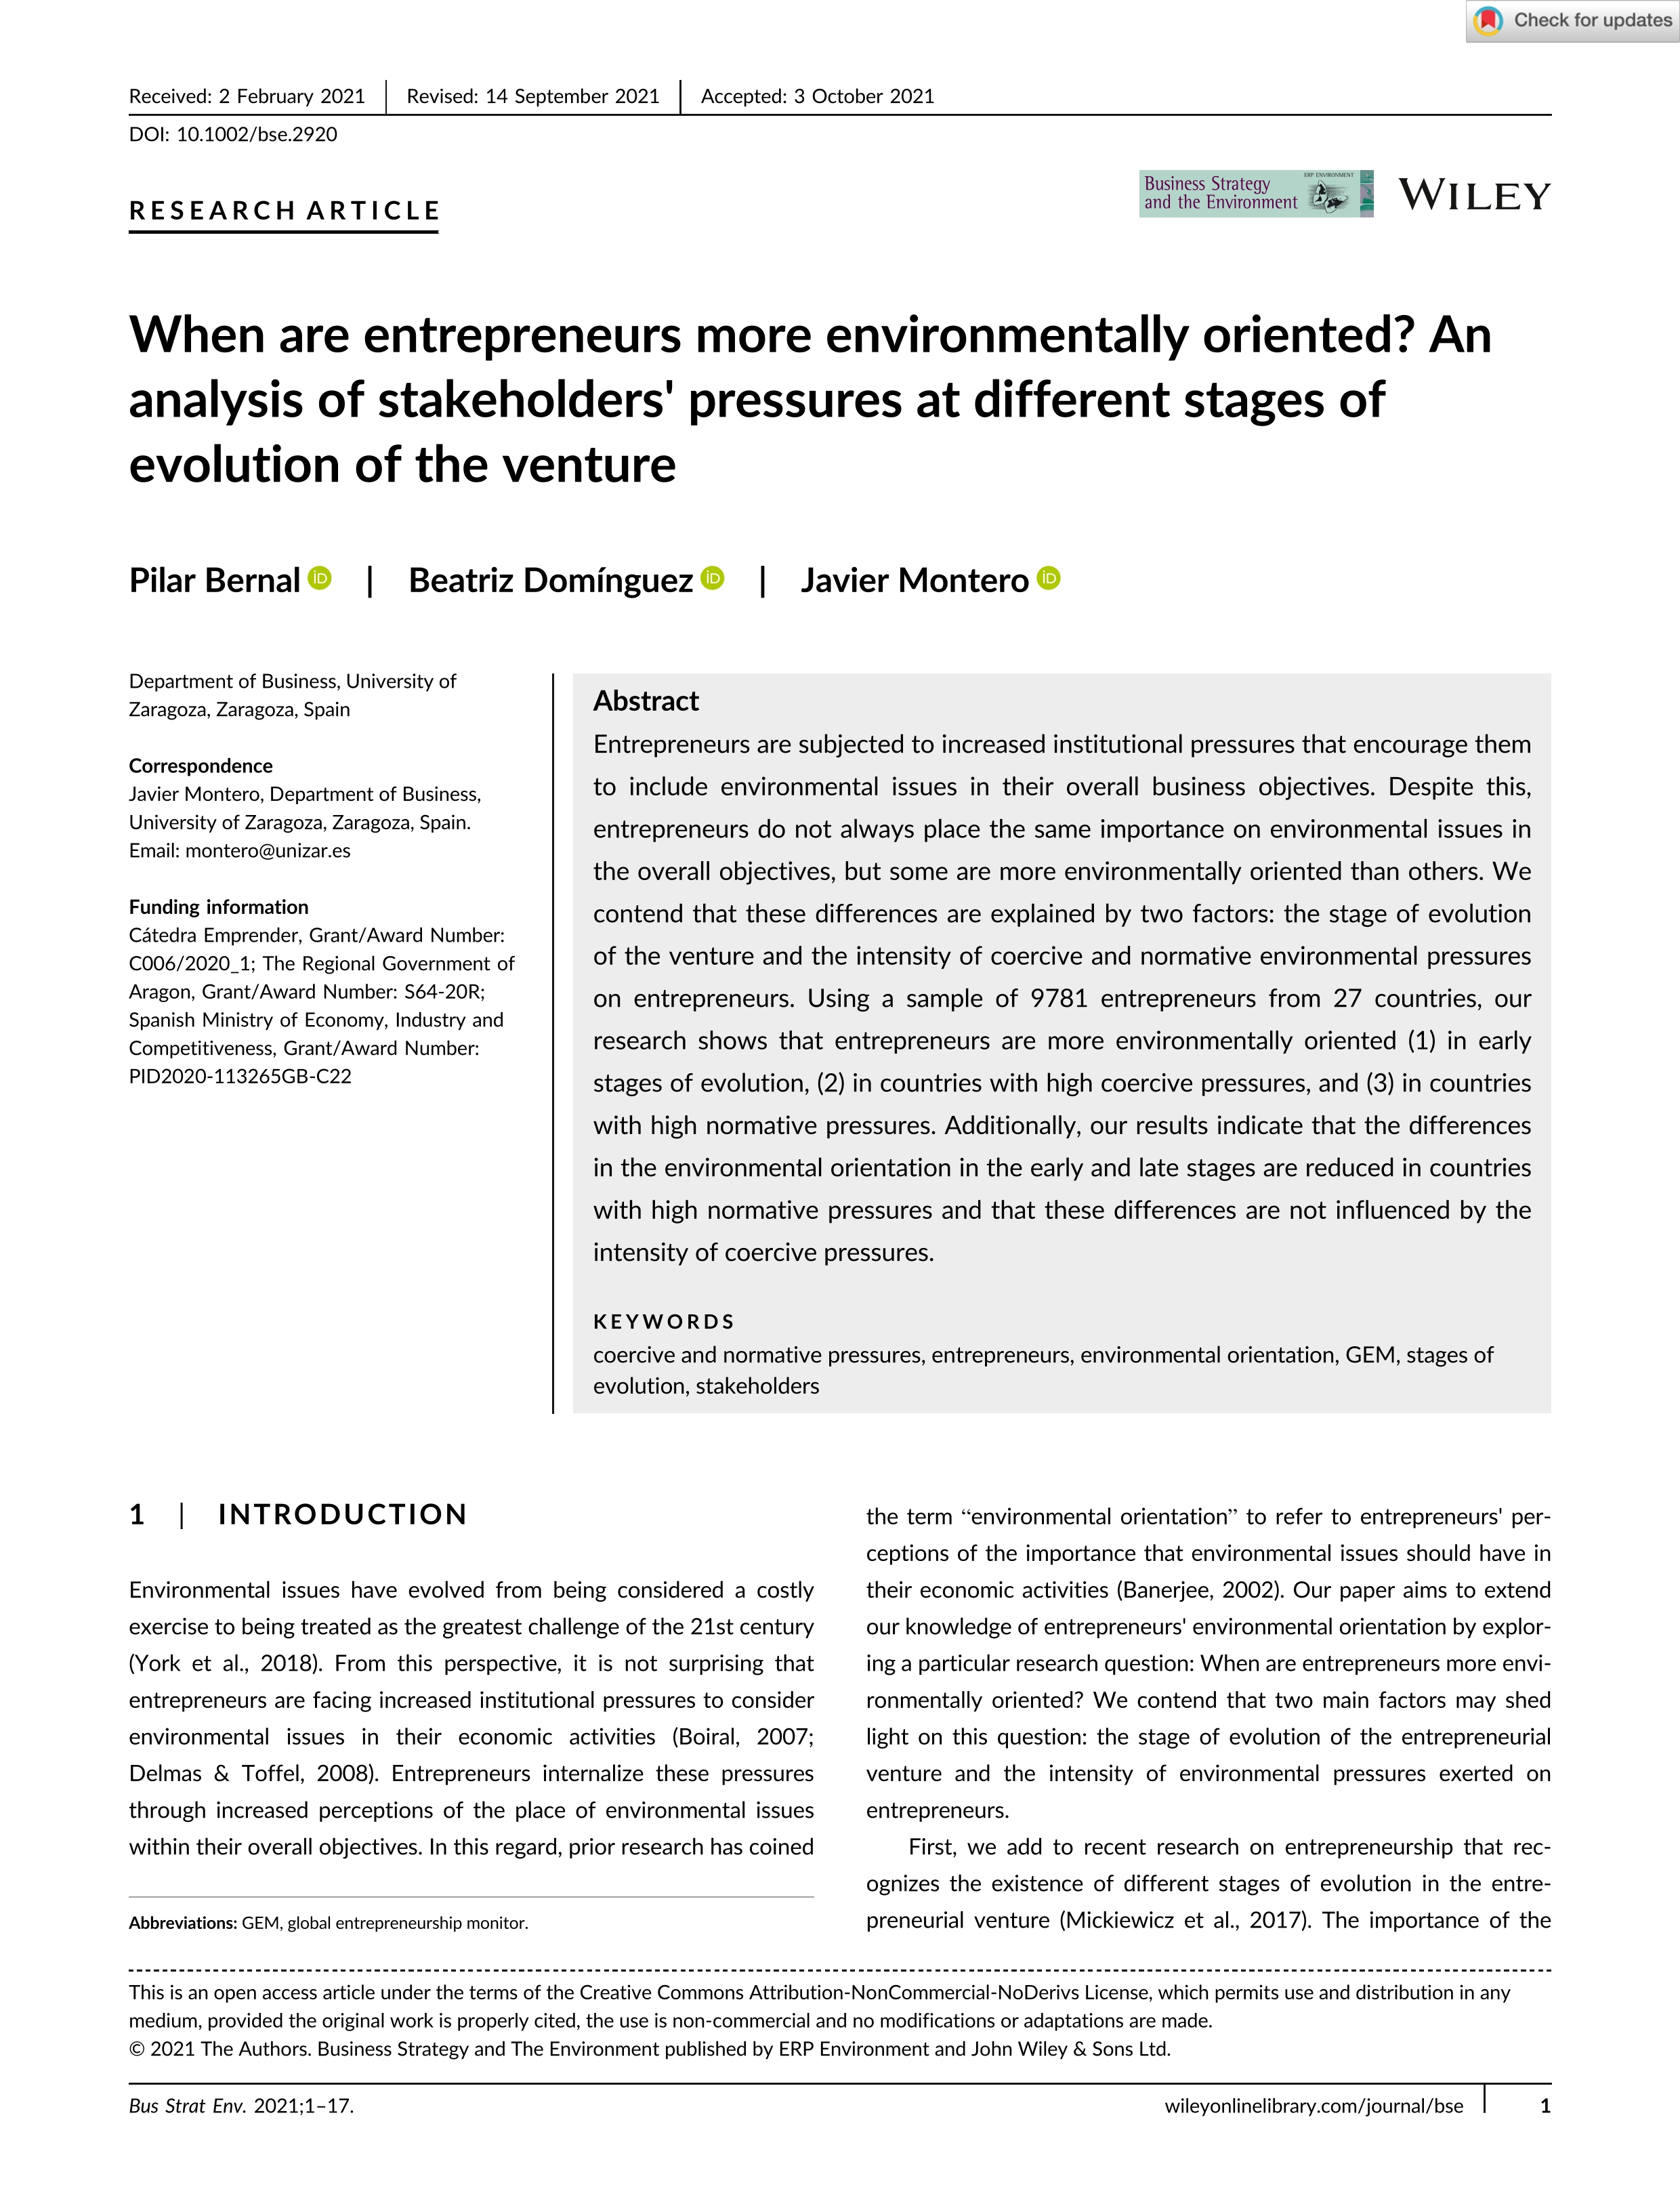 When are entrepreneurs more environmentally oriented? An analysis of stakeholders' pressures at different stages of evolution of the venture